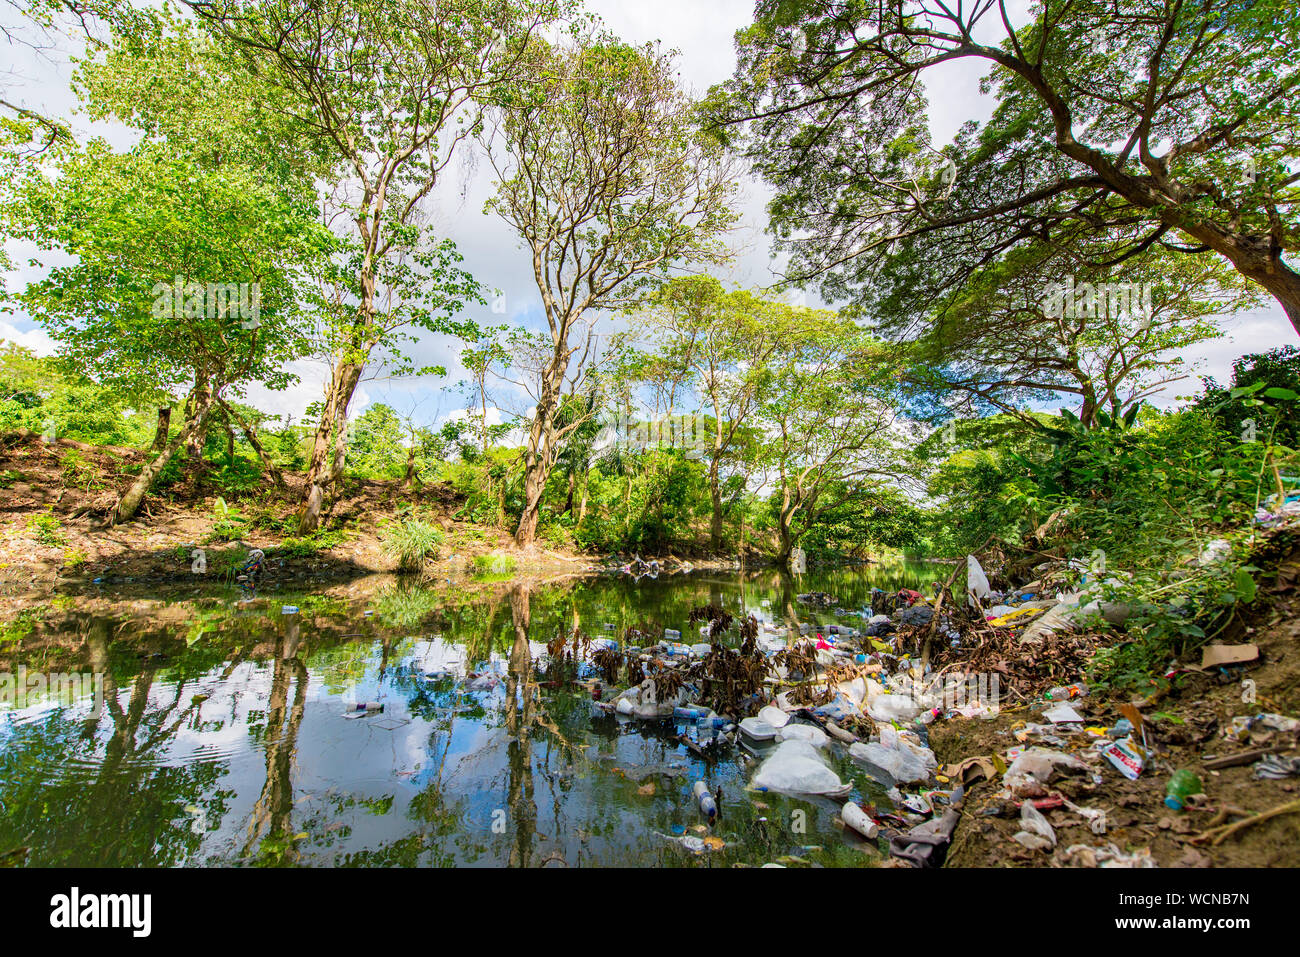 Green River Banks With Trees Full of Garbage and Junk in Santo Domingo, Republica Dominicana Stock Photo